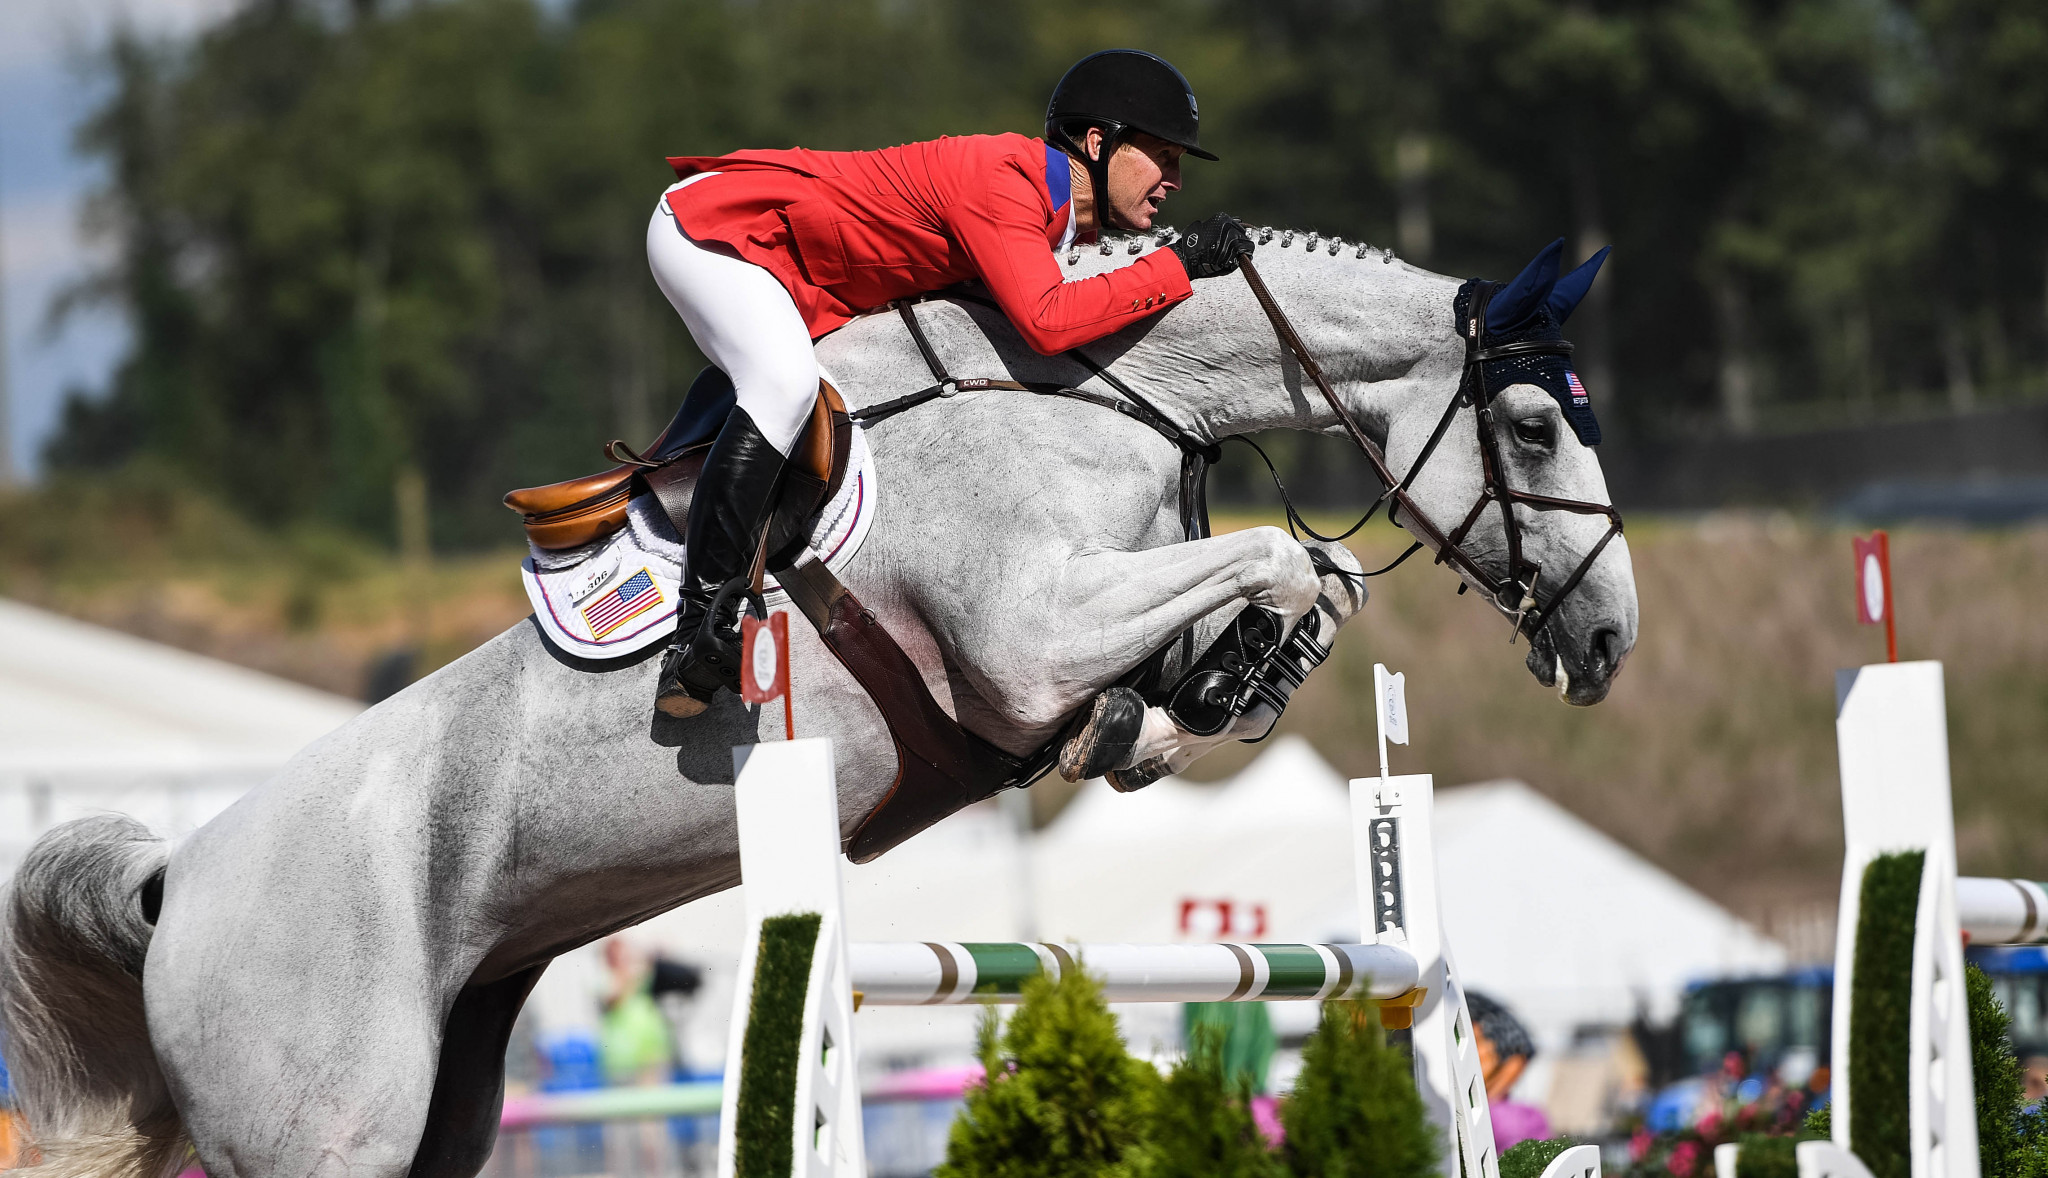 McLain Ward, on Clinta, earned the US a first team jumping gold at the FEI World Equestrian Games with his fast clear on Clinta in a jump-off with Sweden ©FEI